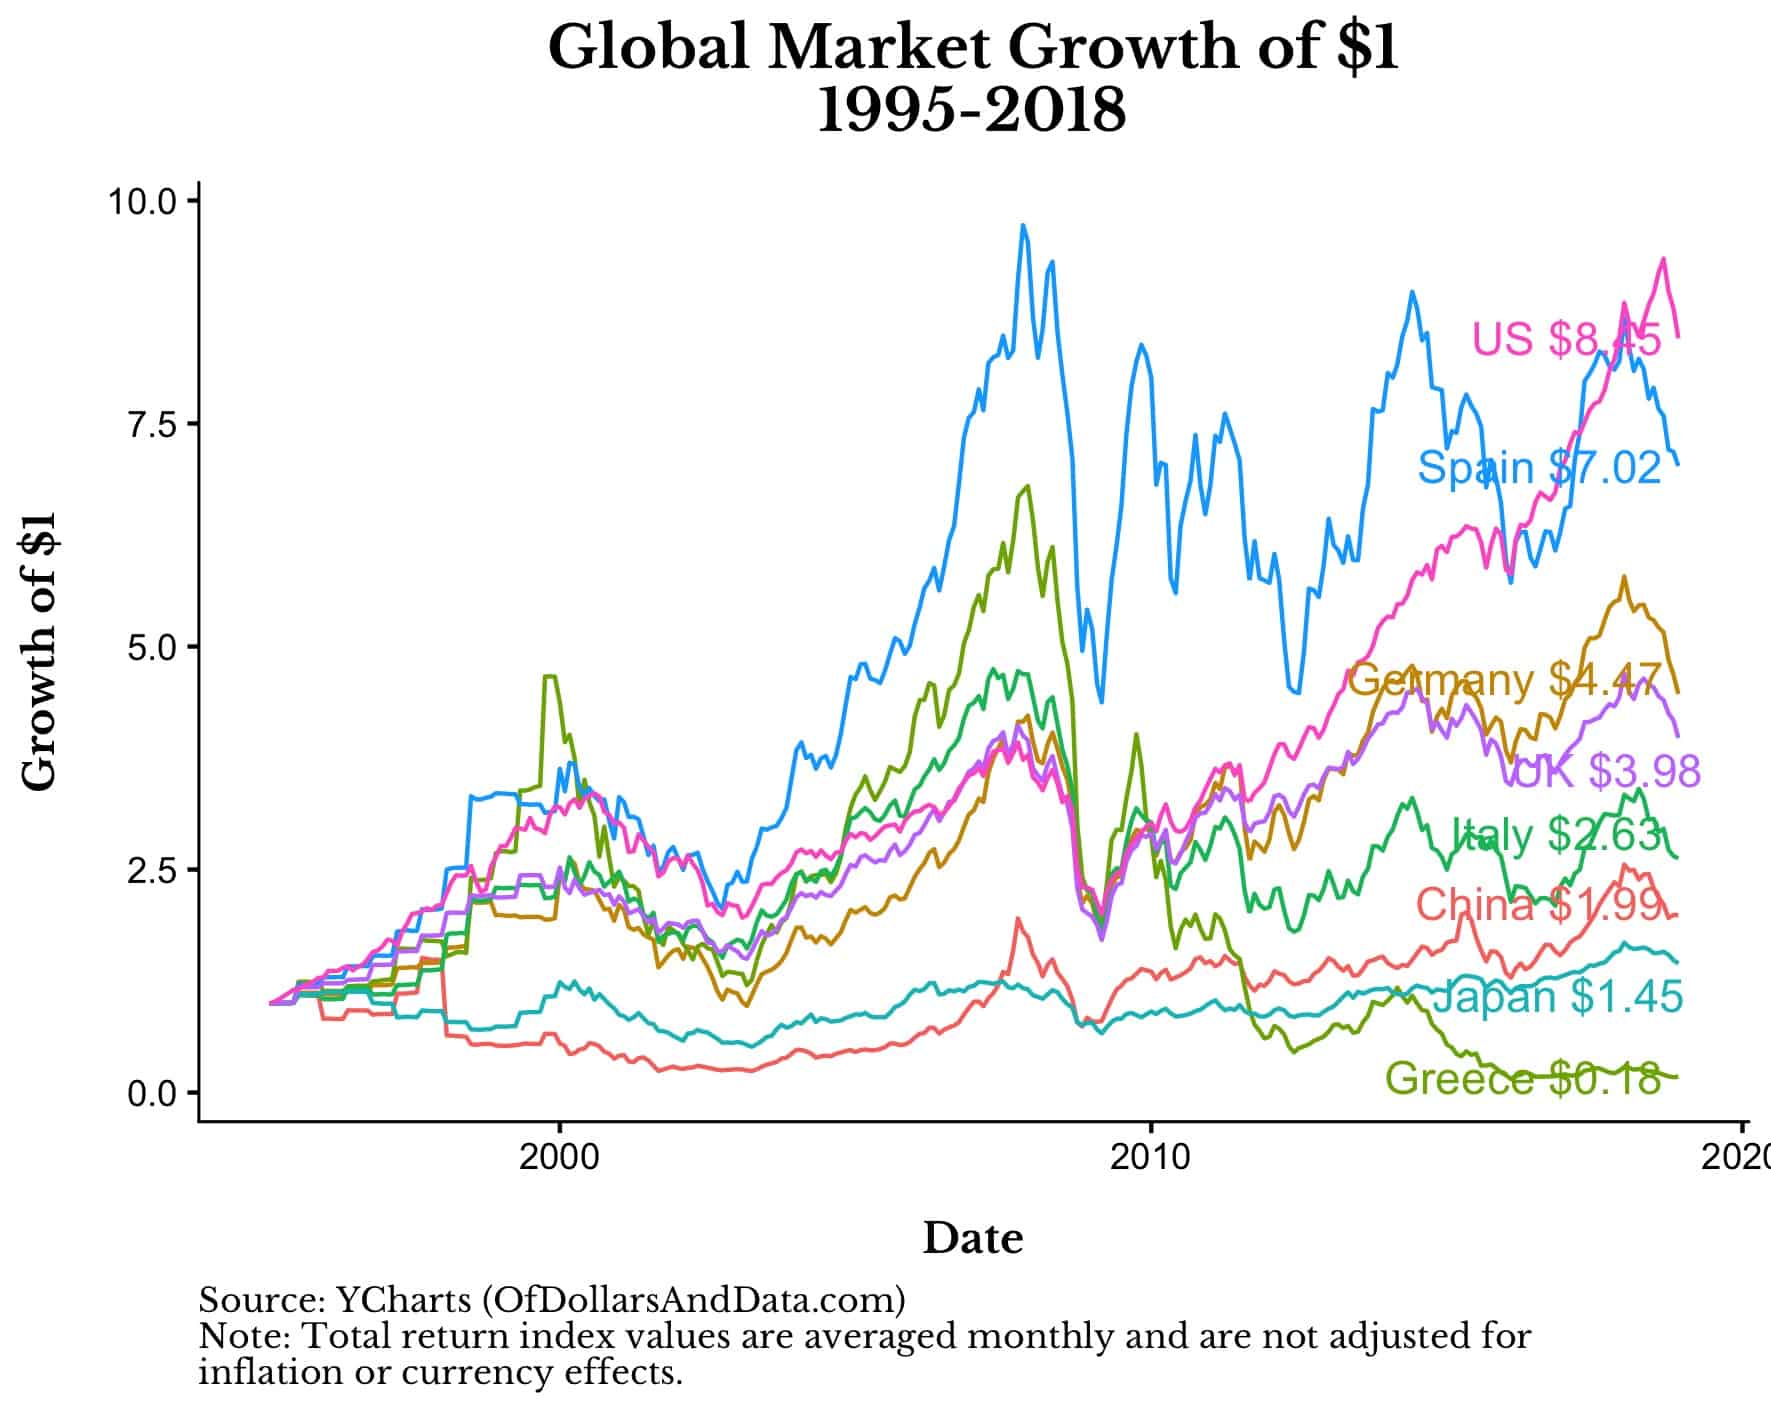 Global market growth of $1 from 1995 to 2018 for various countries.